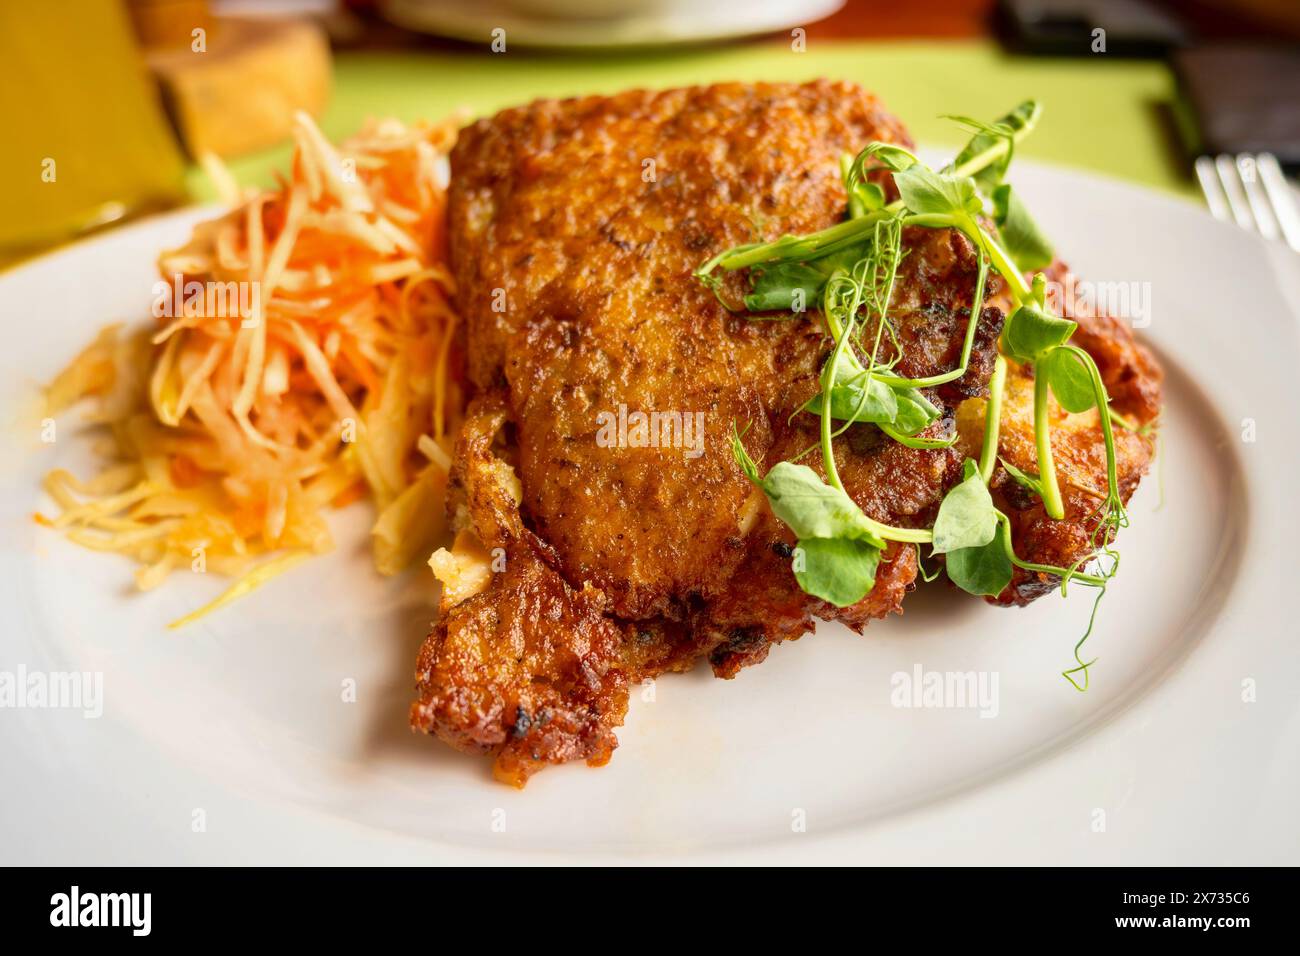 Fried pork meat in potato dough, carrot and cabbage salad, sprouted pea leaf on white plate on table. Stock Photo